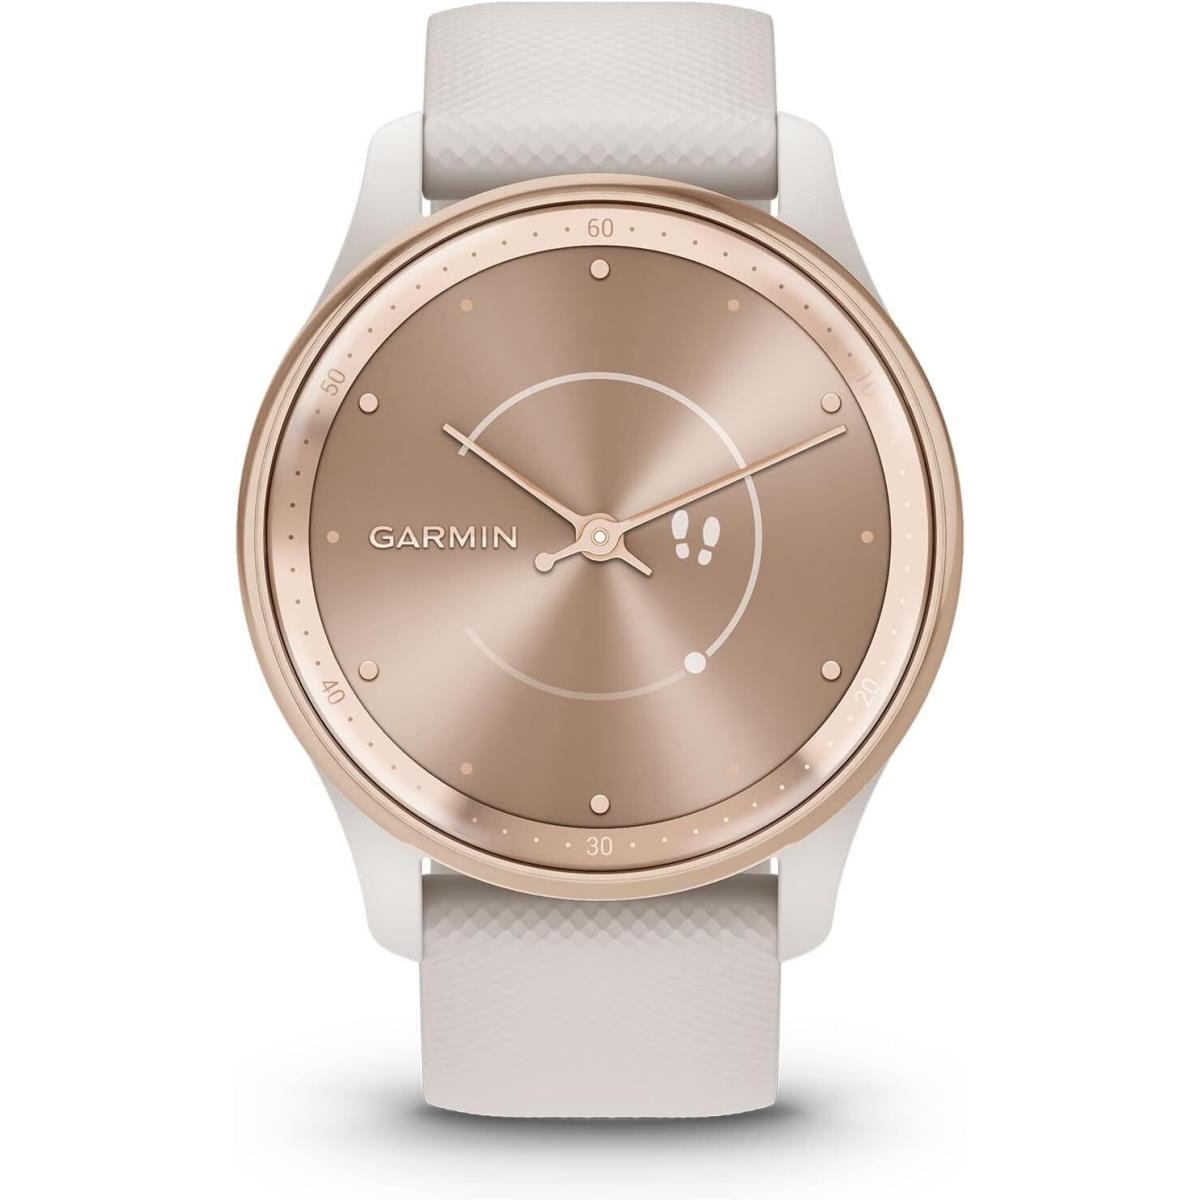 Garmin Vivomove Trend Hybrid Gps Smartwatch with Safety and Tracking Peach Gold with Ivory